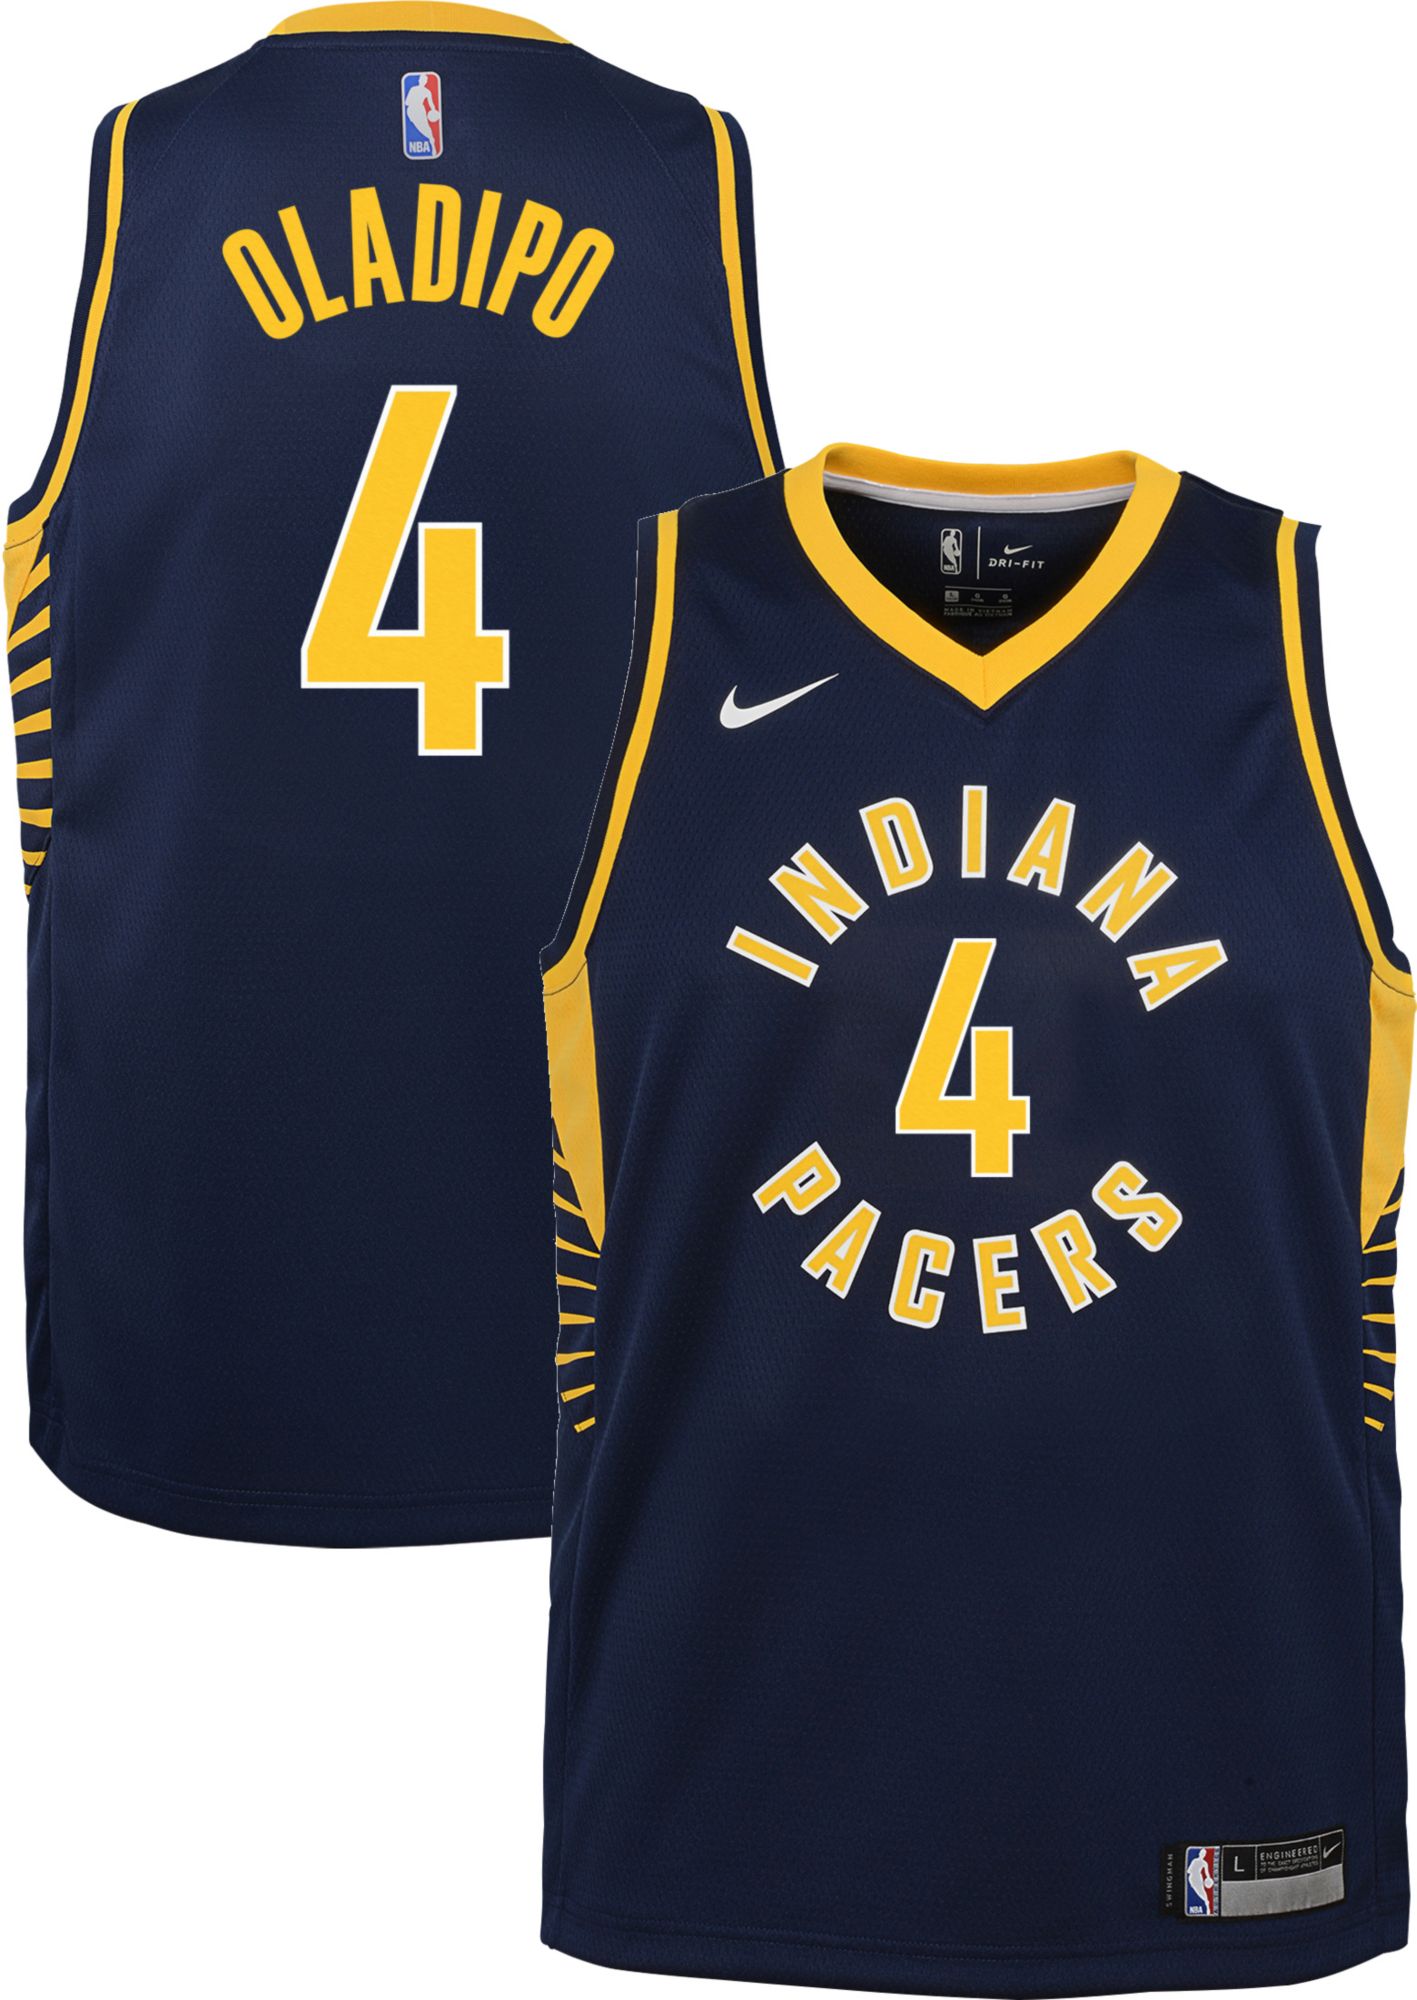 victor oladipo youth jersey